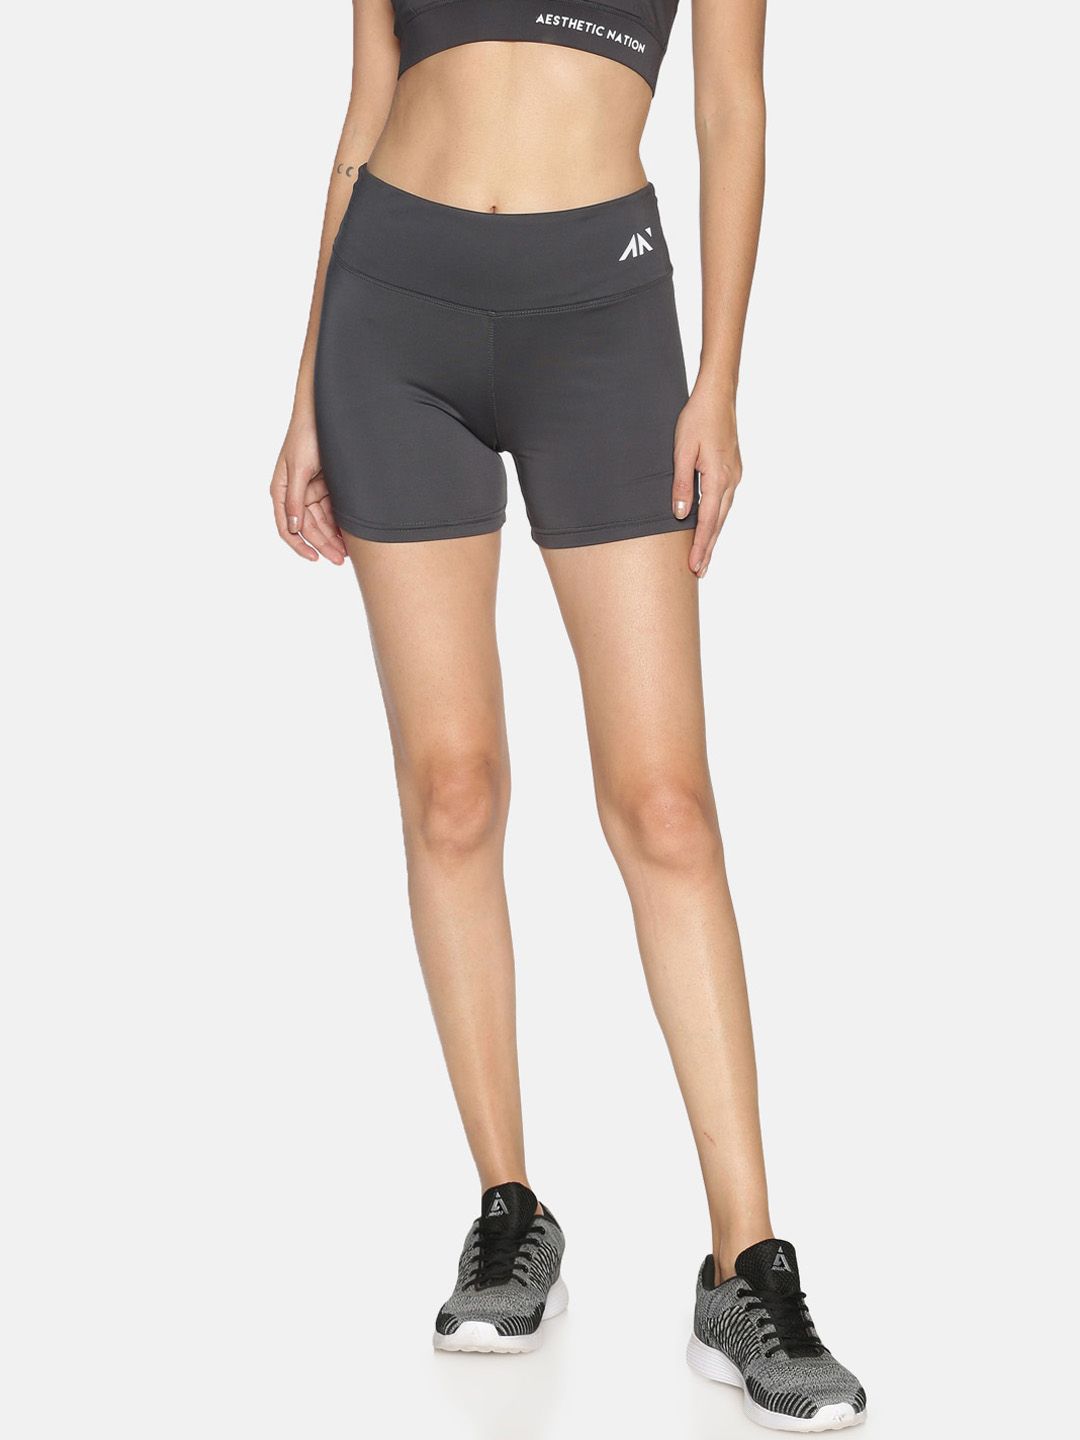 AESTHETIC NATION Women Grey Slim Fit Sports Shorts Price in India